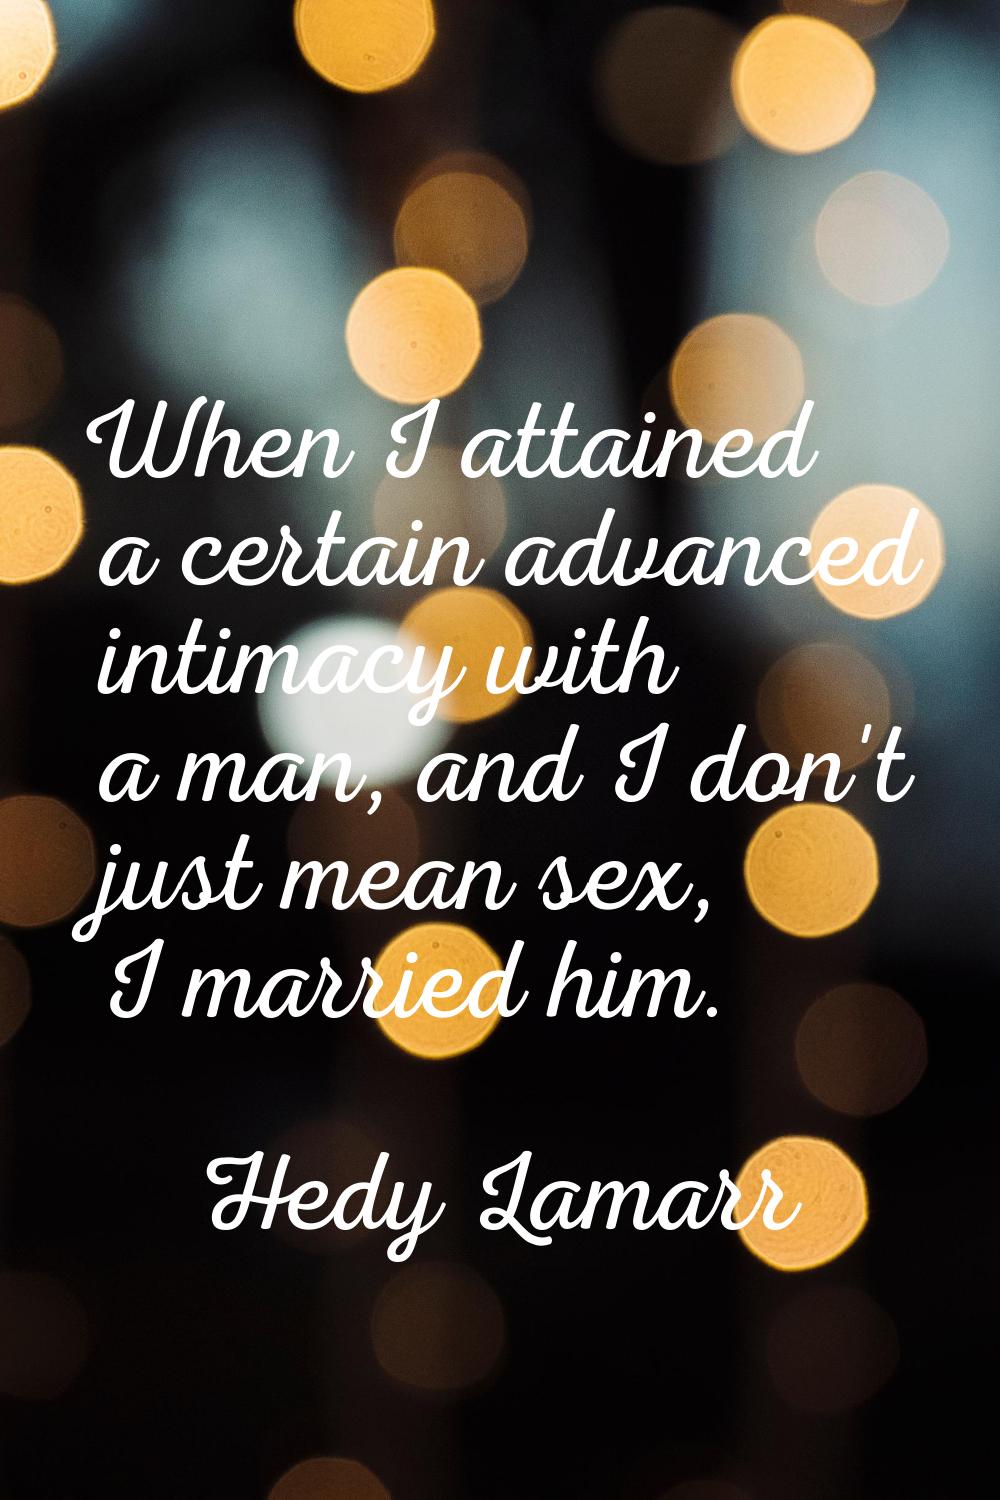 When I attained a certain advanced intimacy with a man, and I don't just mean sex, I married him.